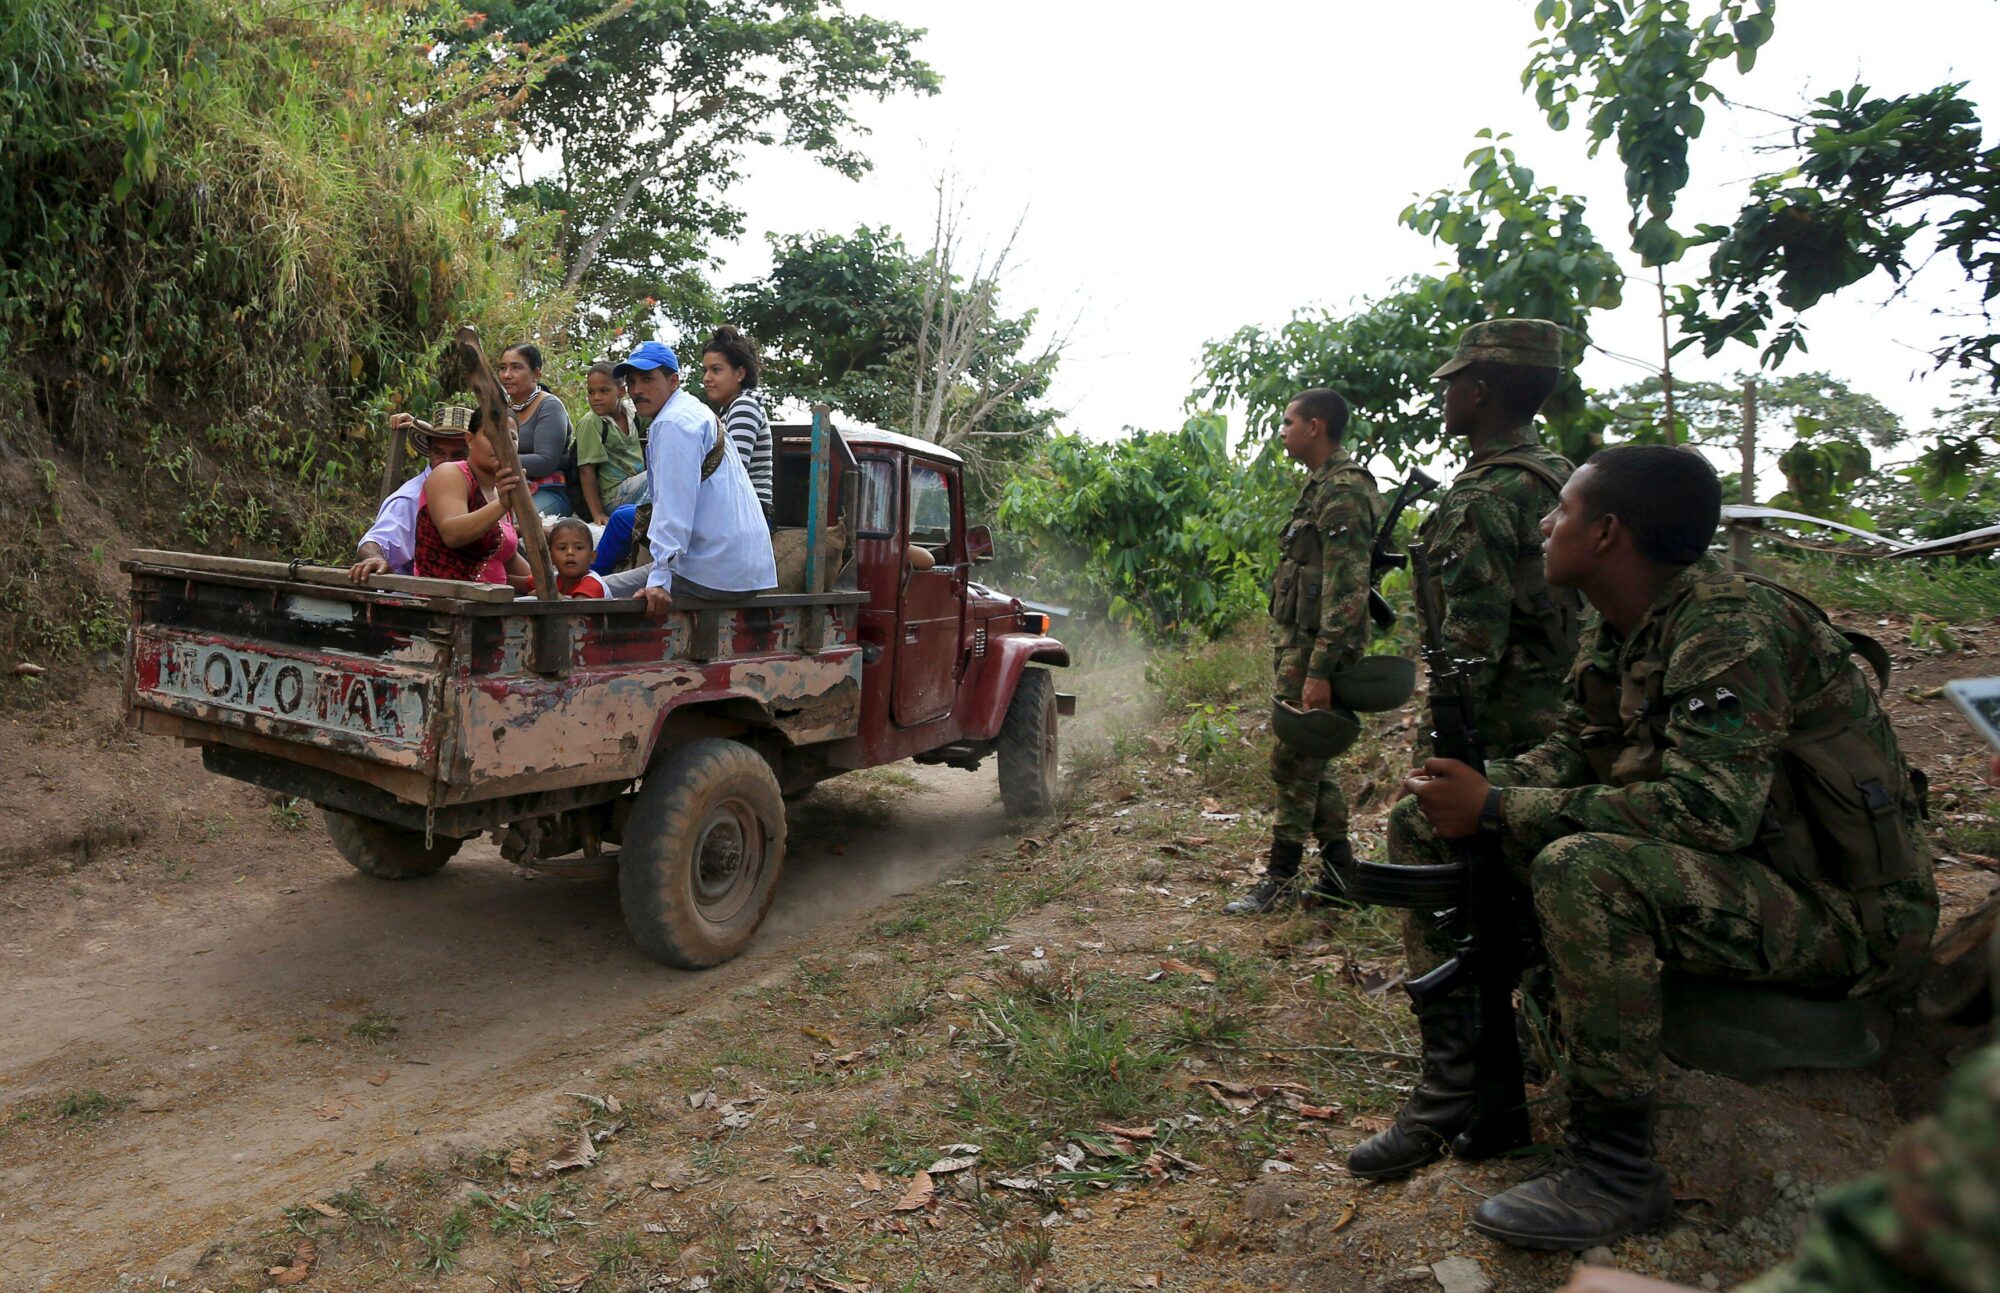 People in a pick-up truck and military on the road